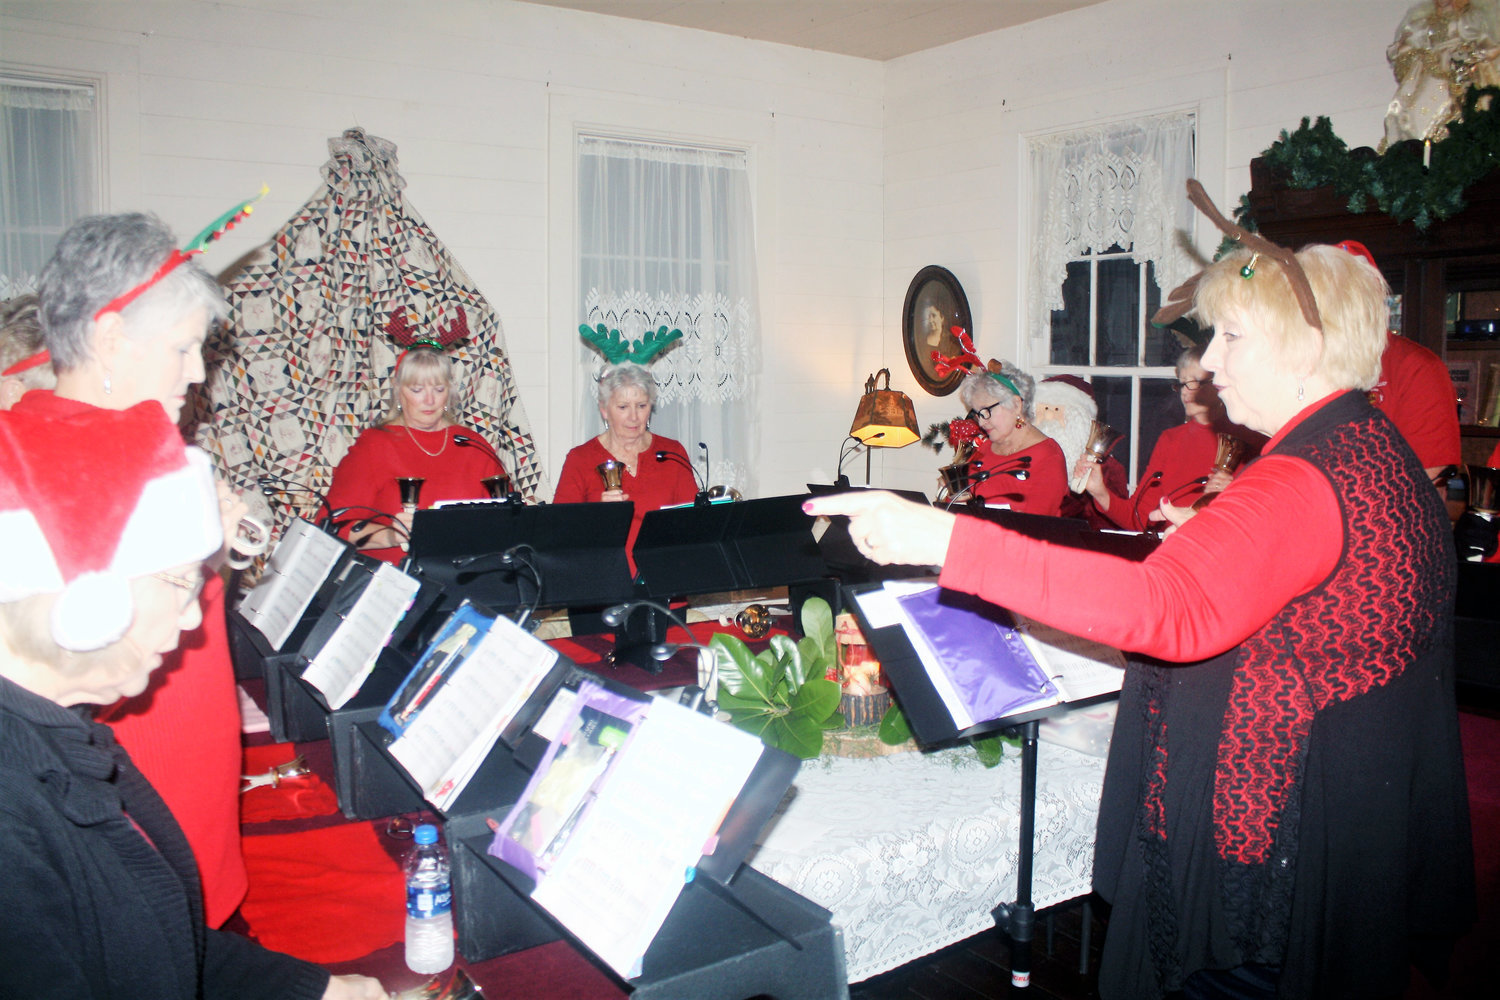 Liberty Bells of the Liberty United Methodist Church perform at the Stinson House holiday open house on Dec. 13. The event featured treats, live music and cheerful holiday decorations.